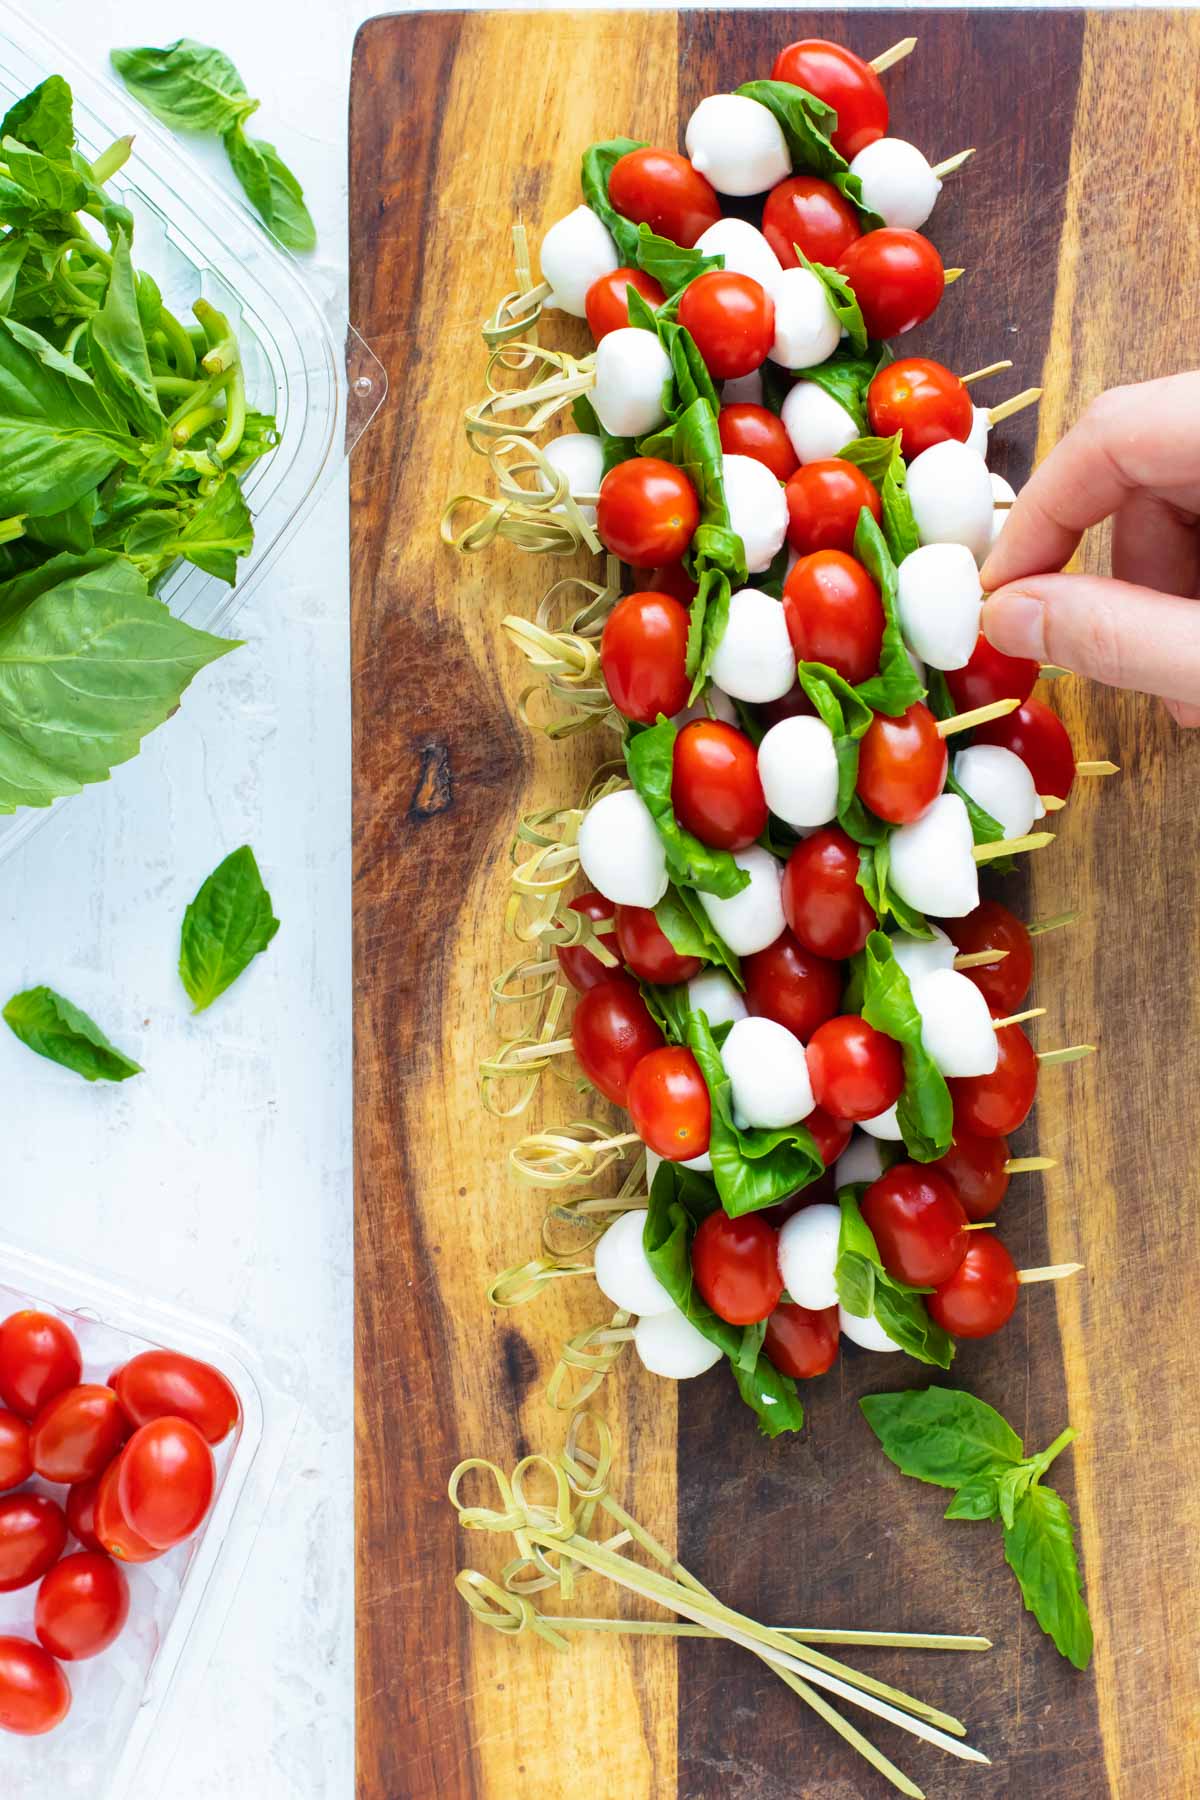 A hand picking up a caprese skewer from a wooden cutting board.